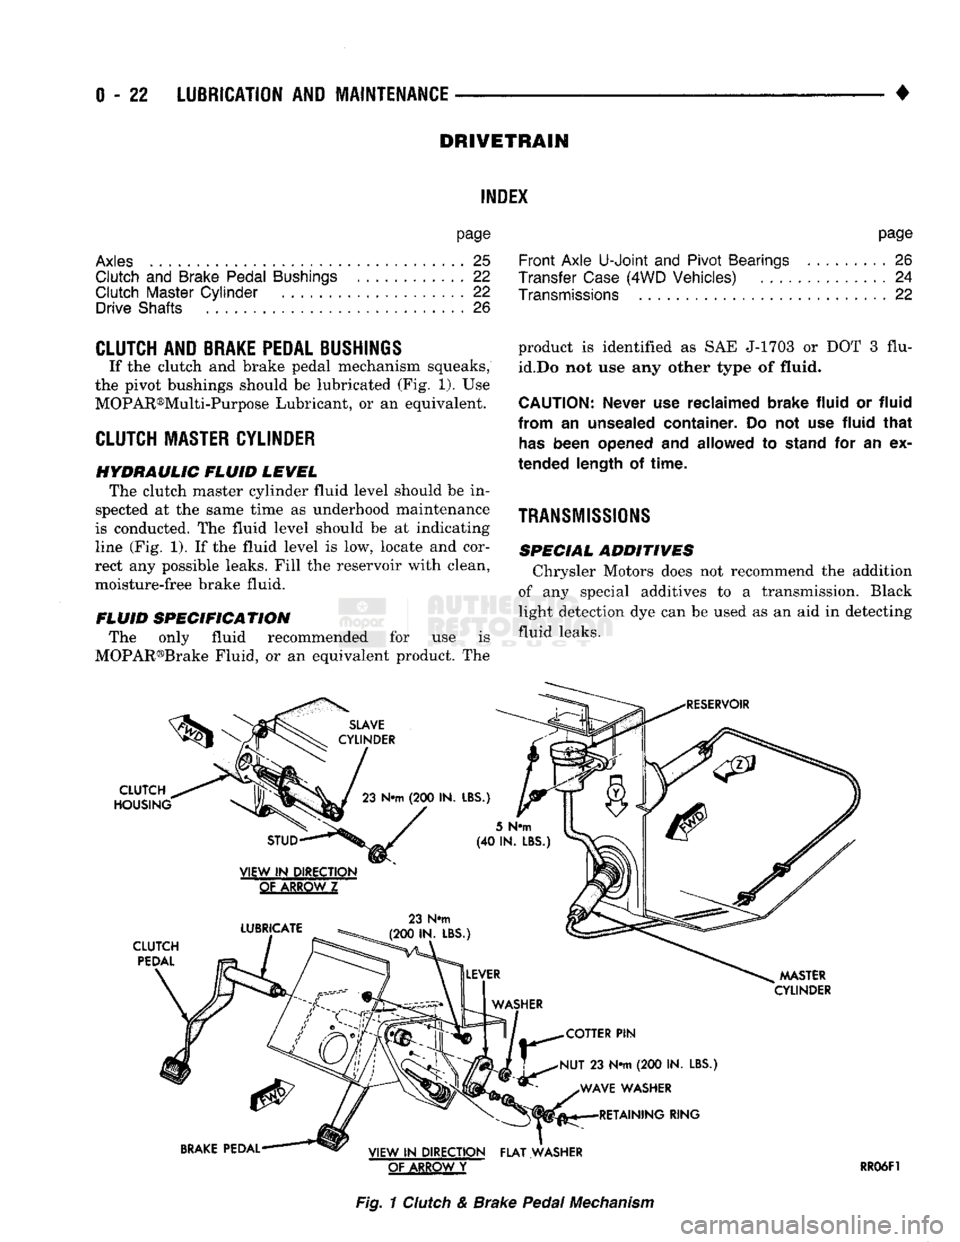 DODGE TRUCK 1993  Service Service Manual 
0
 - 22
 LUBRICATION
 AND
 MAINTENANCE 

DRIVETRAIN 

INDEX 

page 

Axles
 25 
 Clutch
 and
 Brake Pedal
 Bushings
 ............ 22 

Clutch Master Cylinder
 22 

Drive Shafts
 26 
 page 

Front Axl